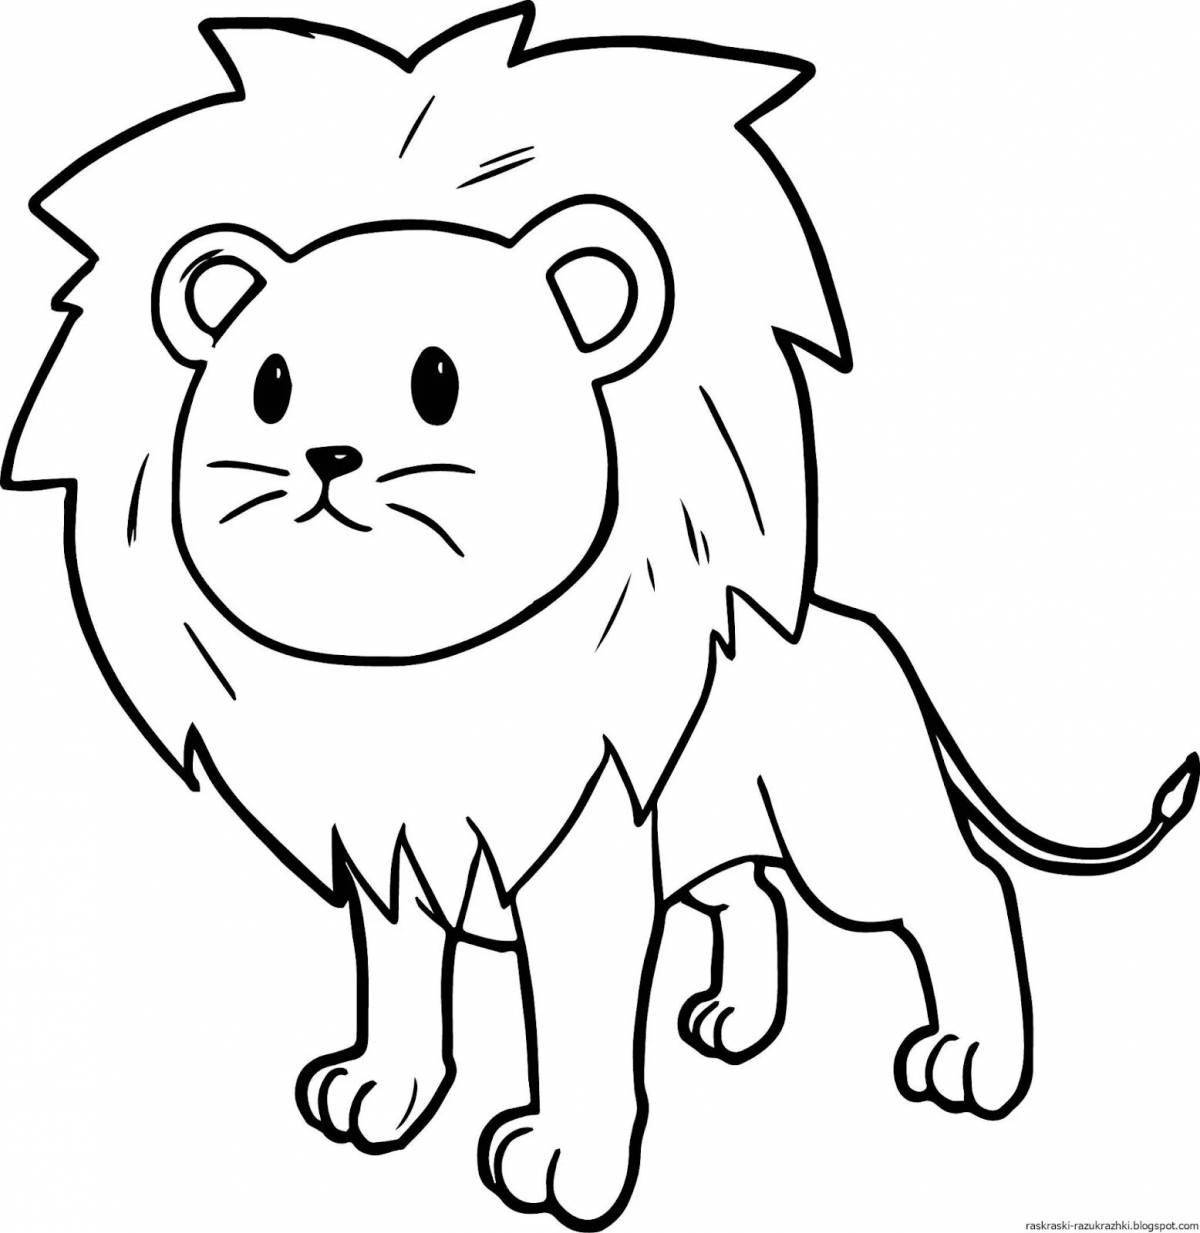 Fat lion coloring book for 3-4 year olds